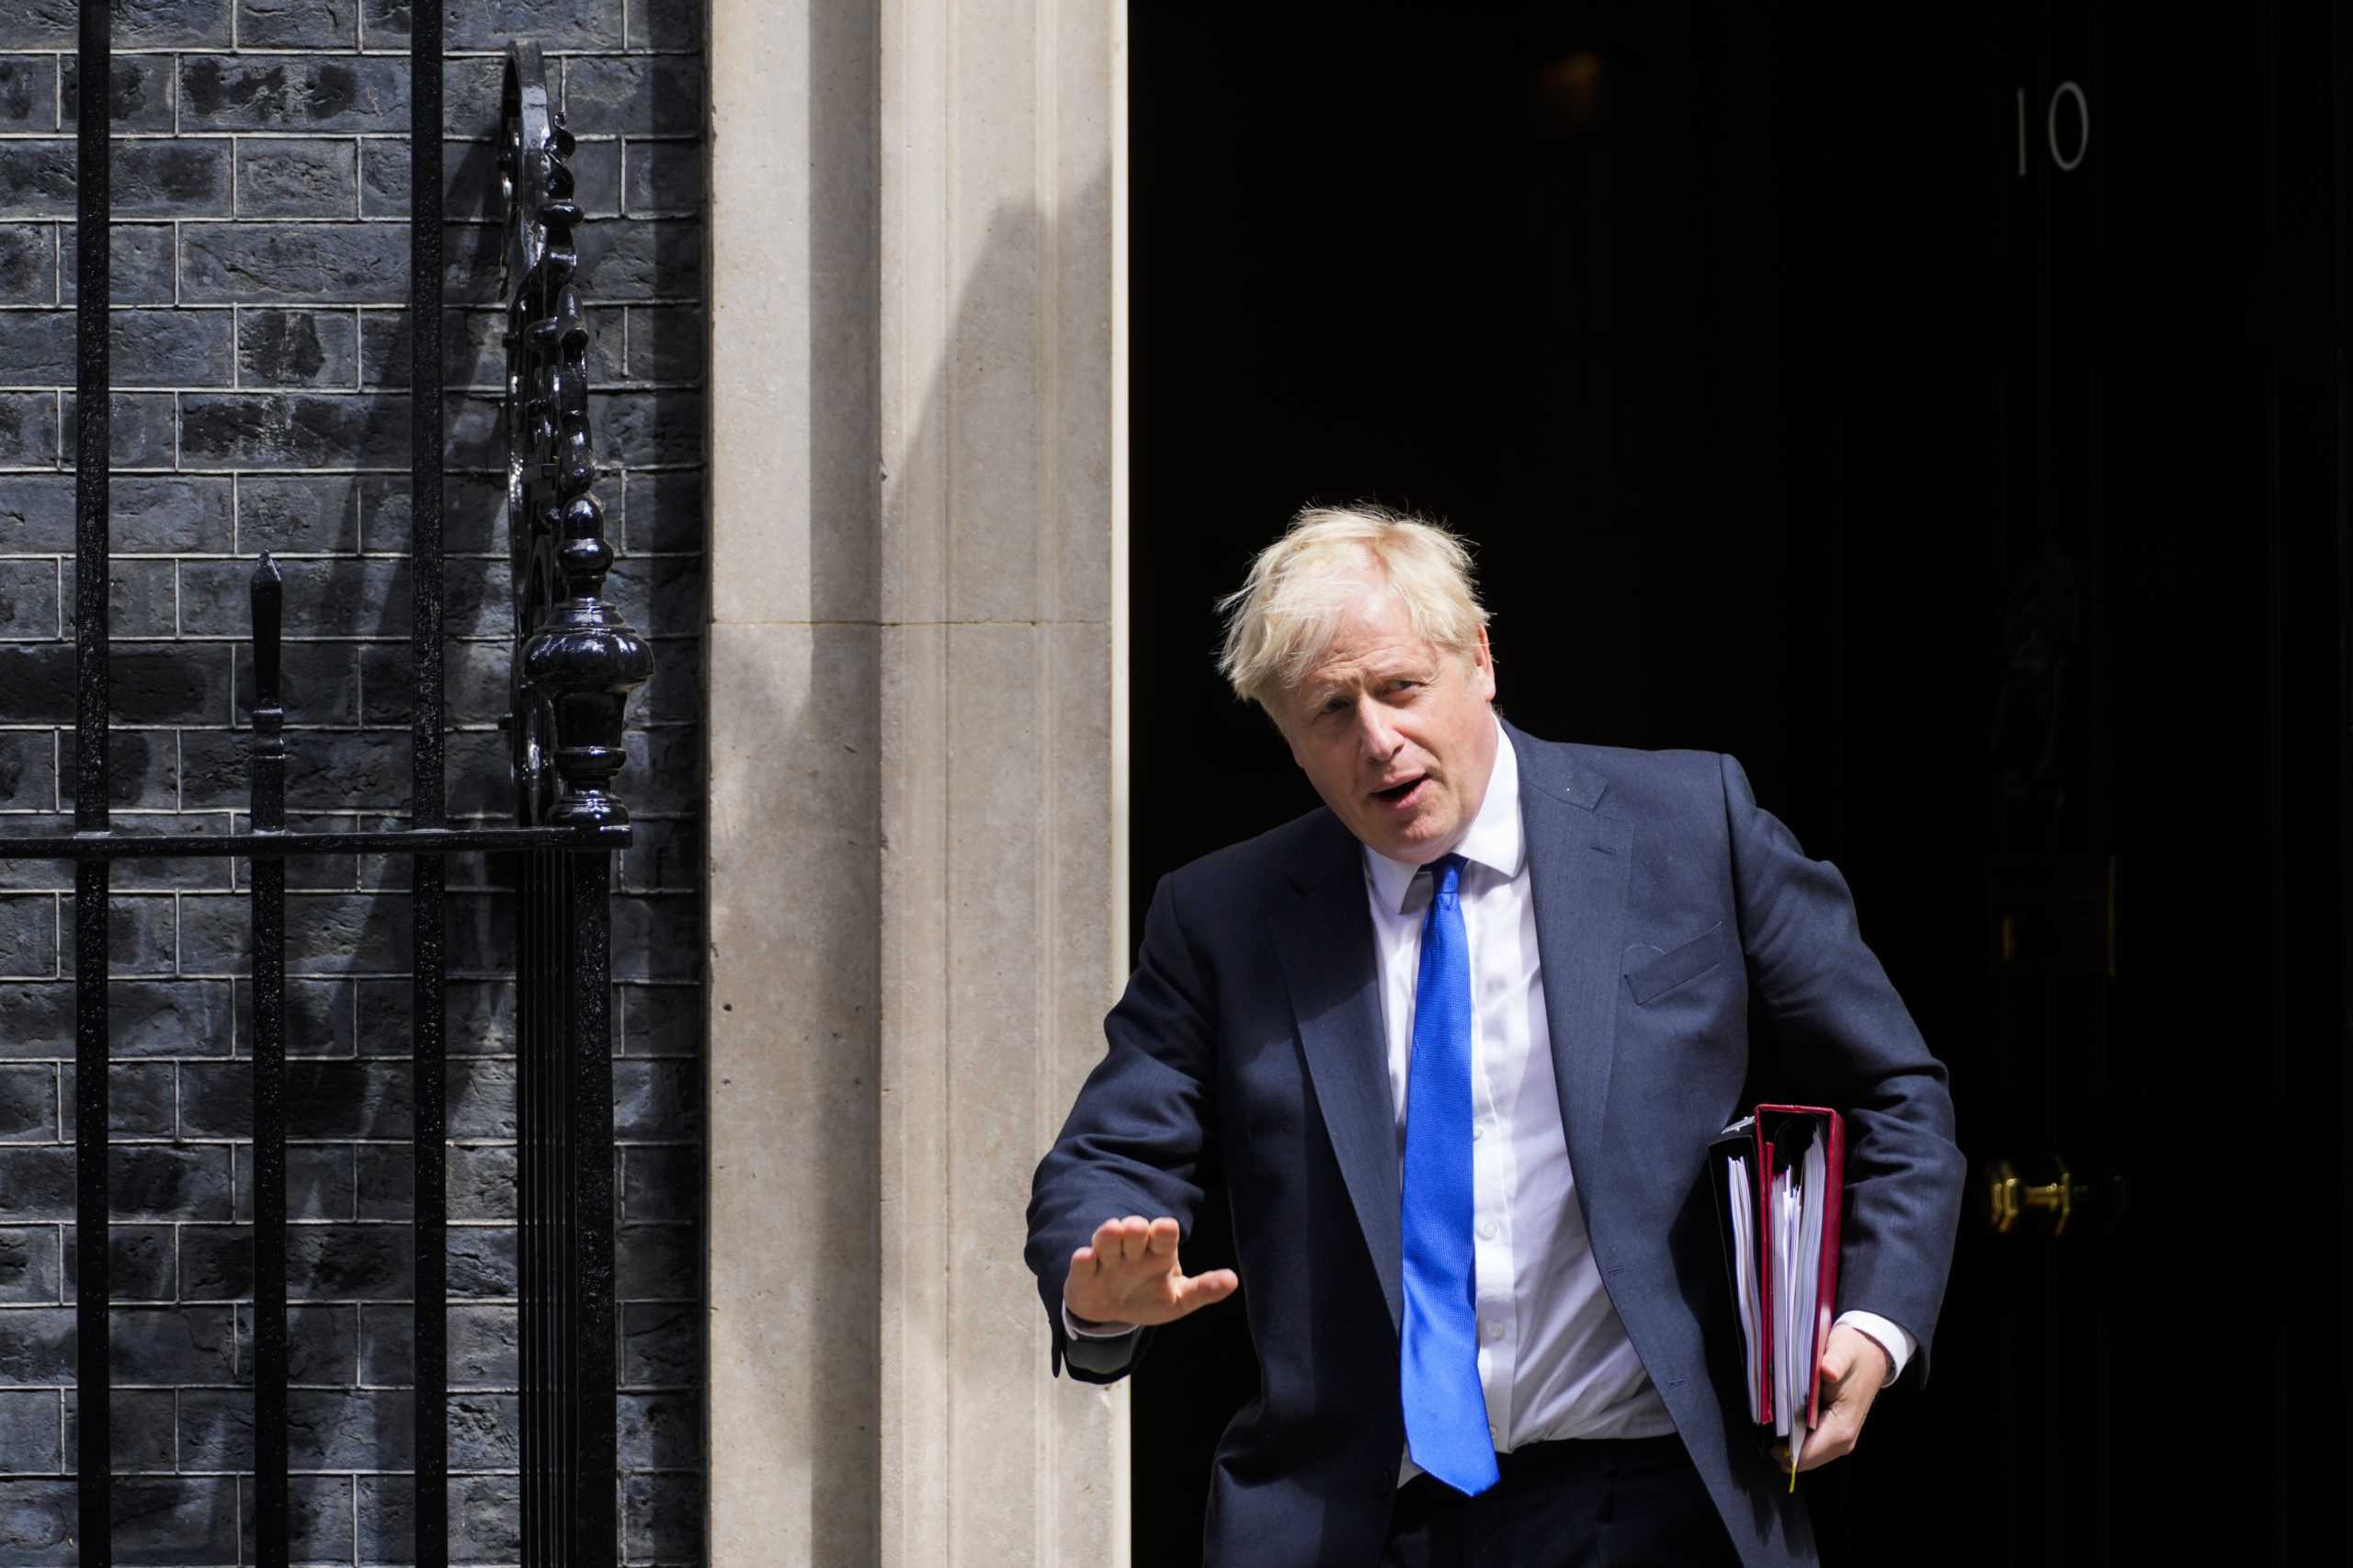 British Prime Minister Boris Johnson leaves 10 Downing Street in London Wednesday. Johnson stepped down as head of the Conservative Party Thursday after his government was rocked by the resignation of 50 top ministers.